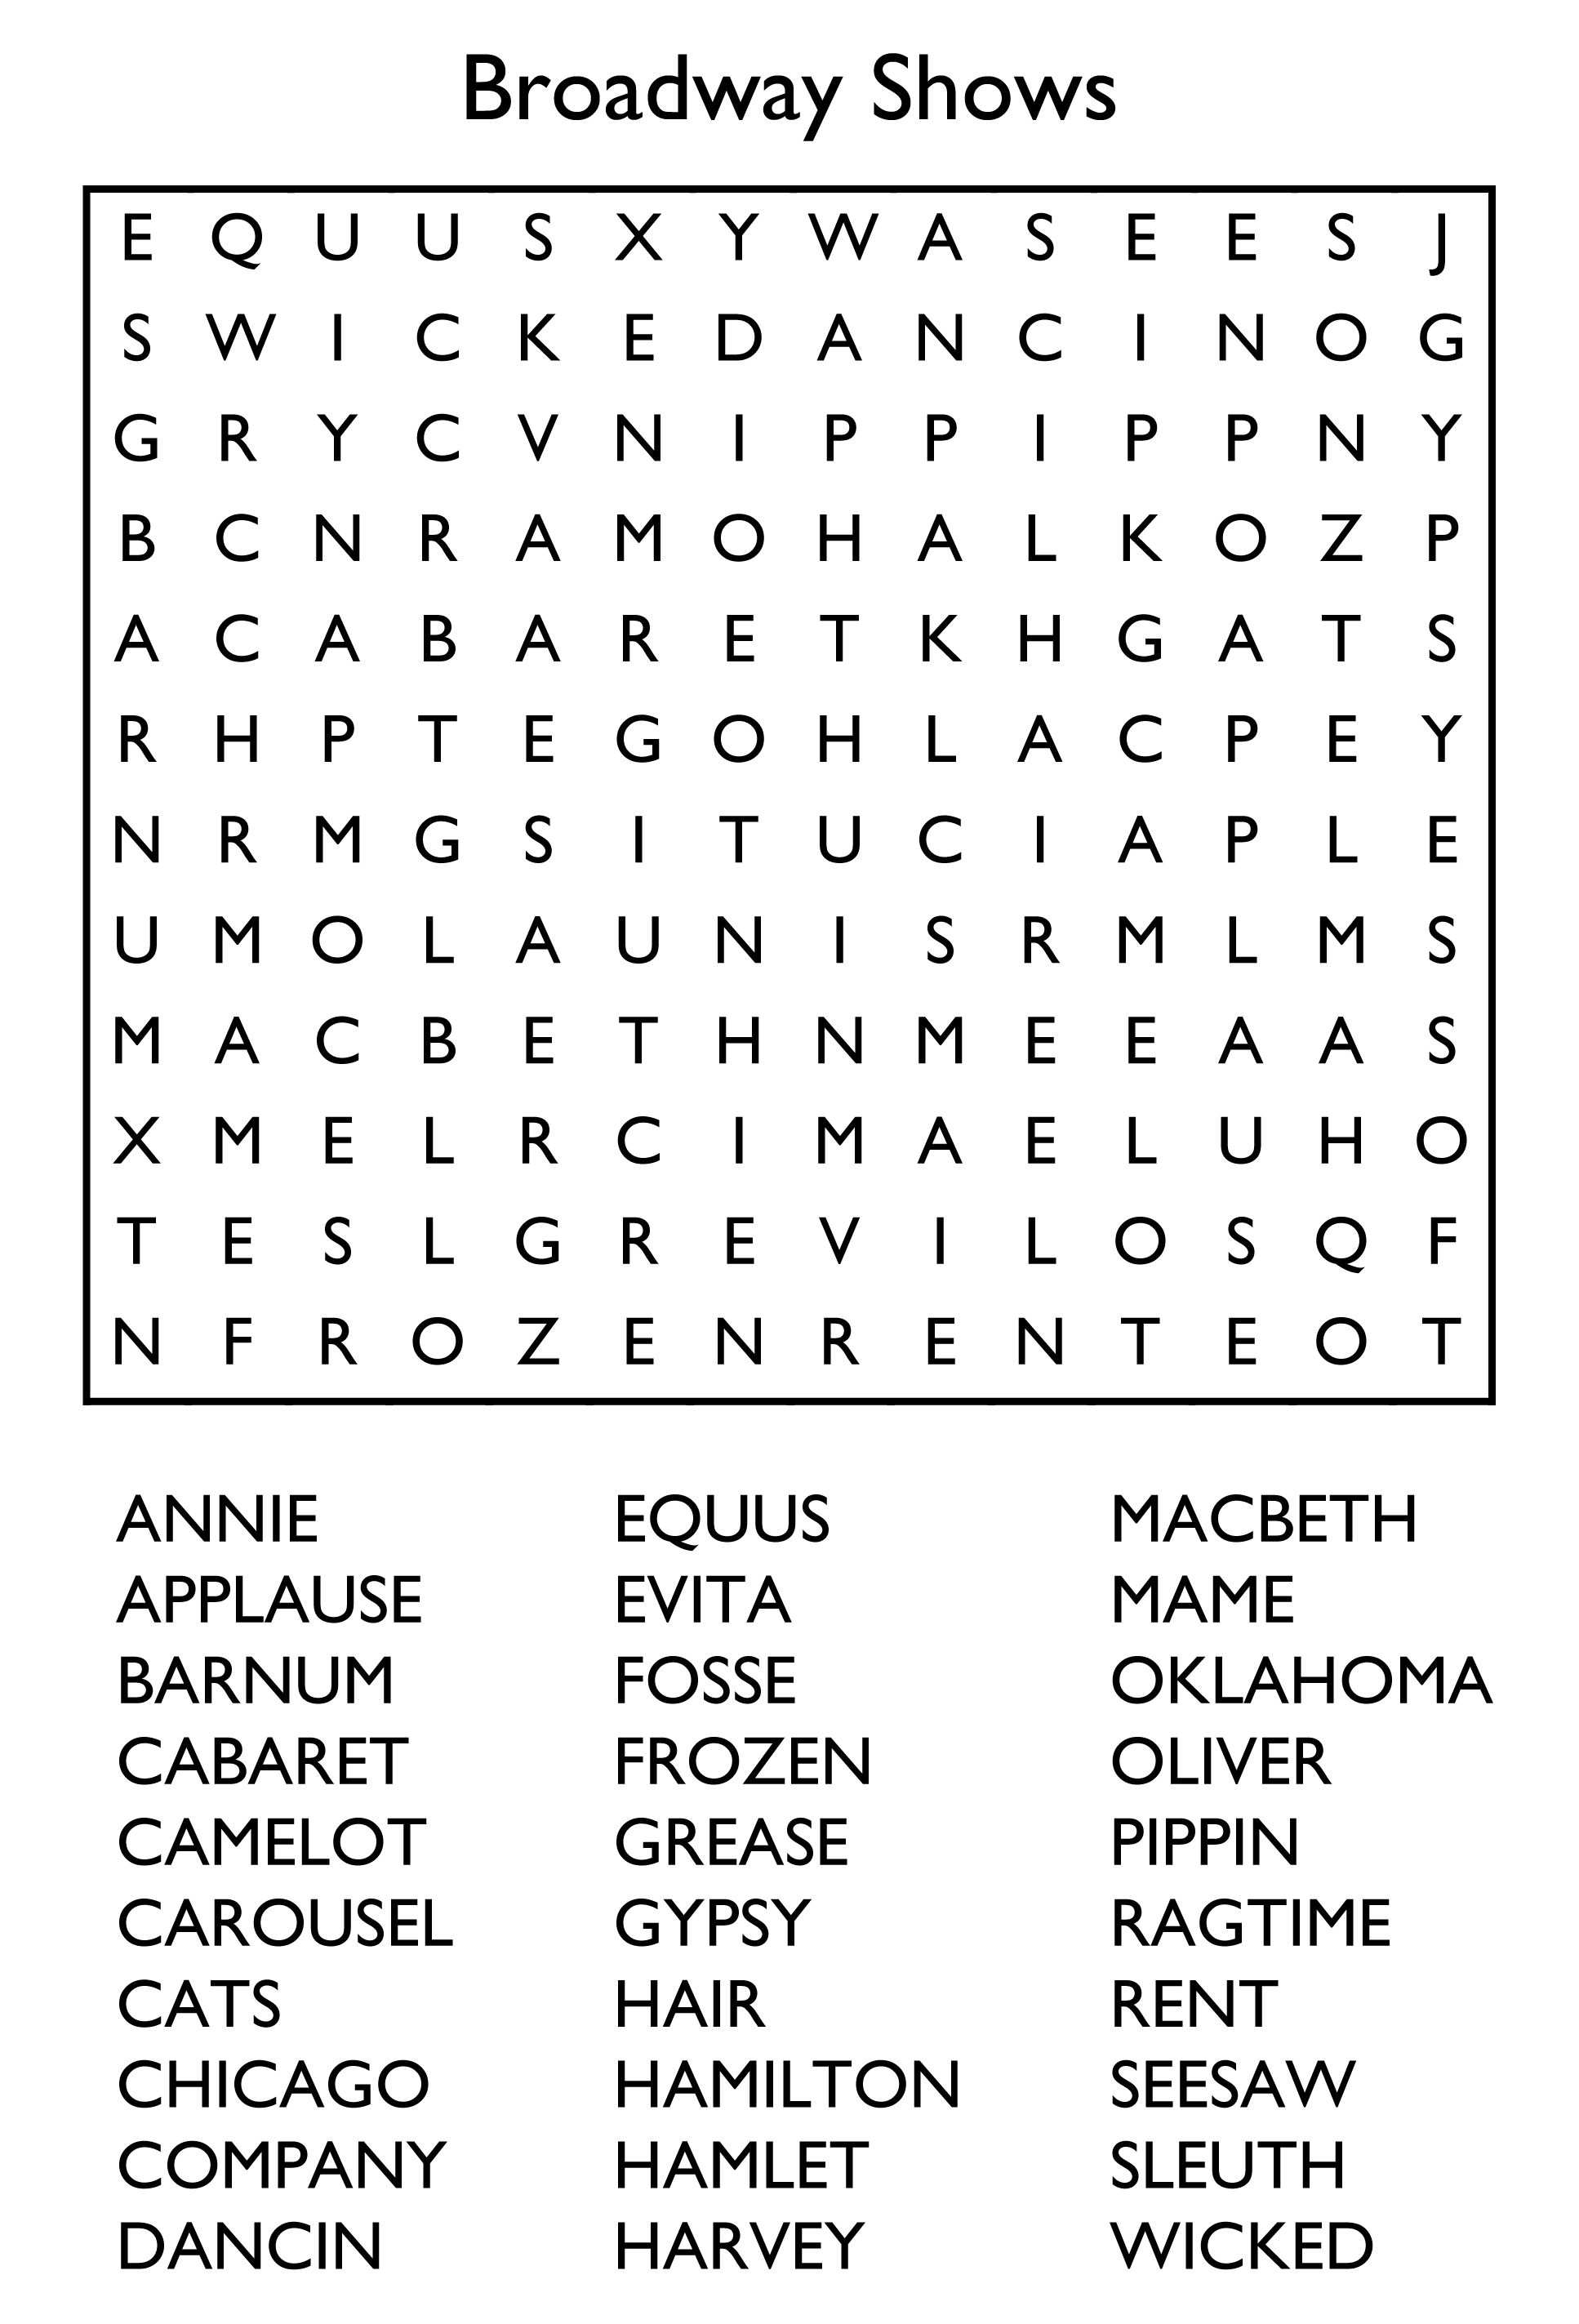 Free Printable Word Search Puzzles - Broadway Shows